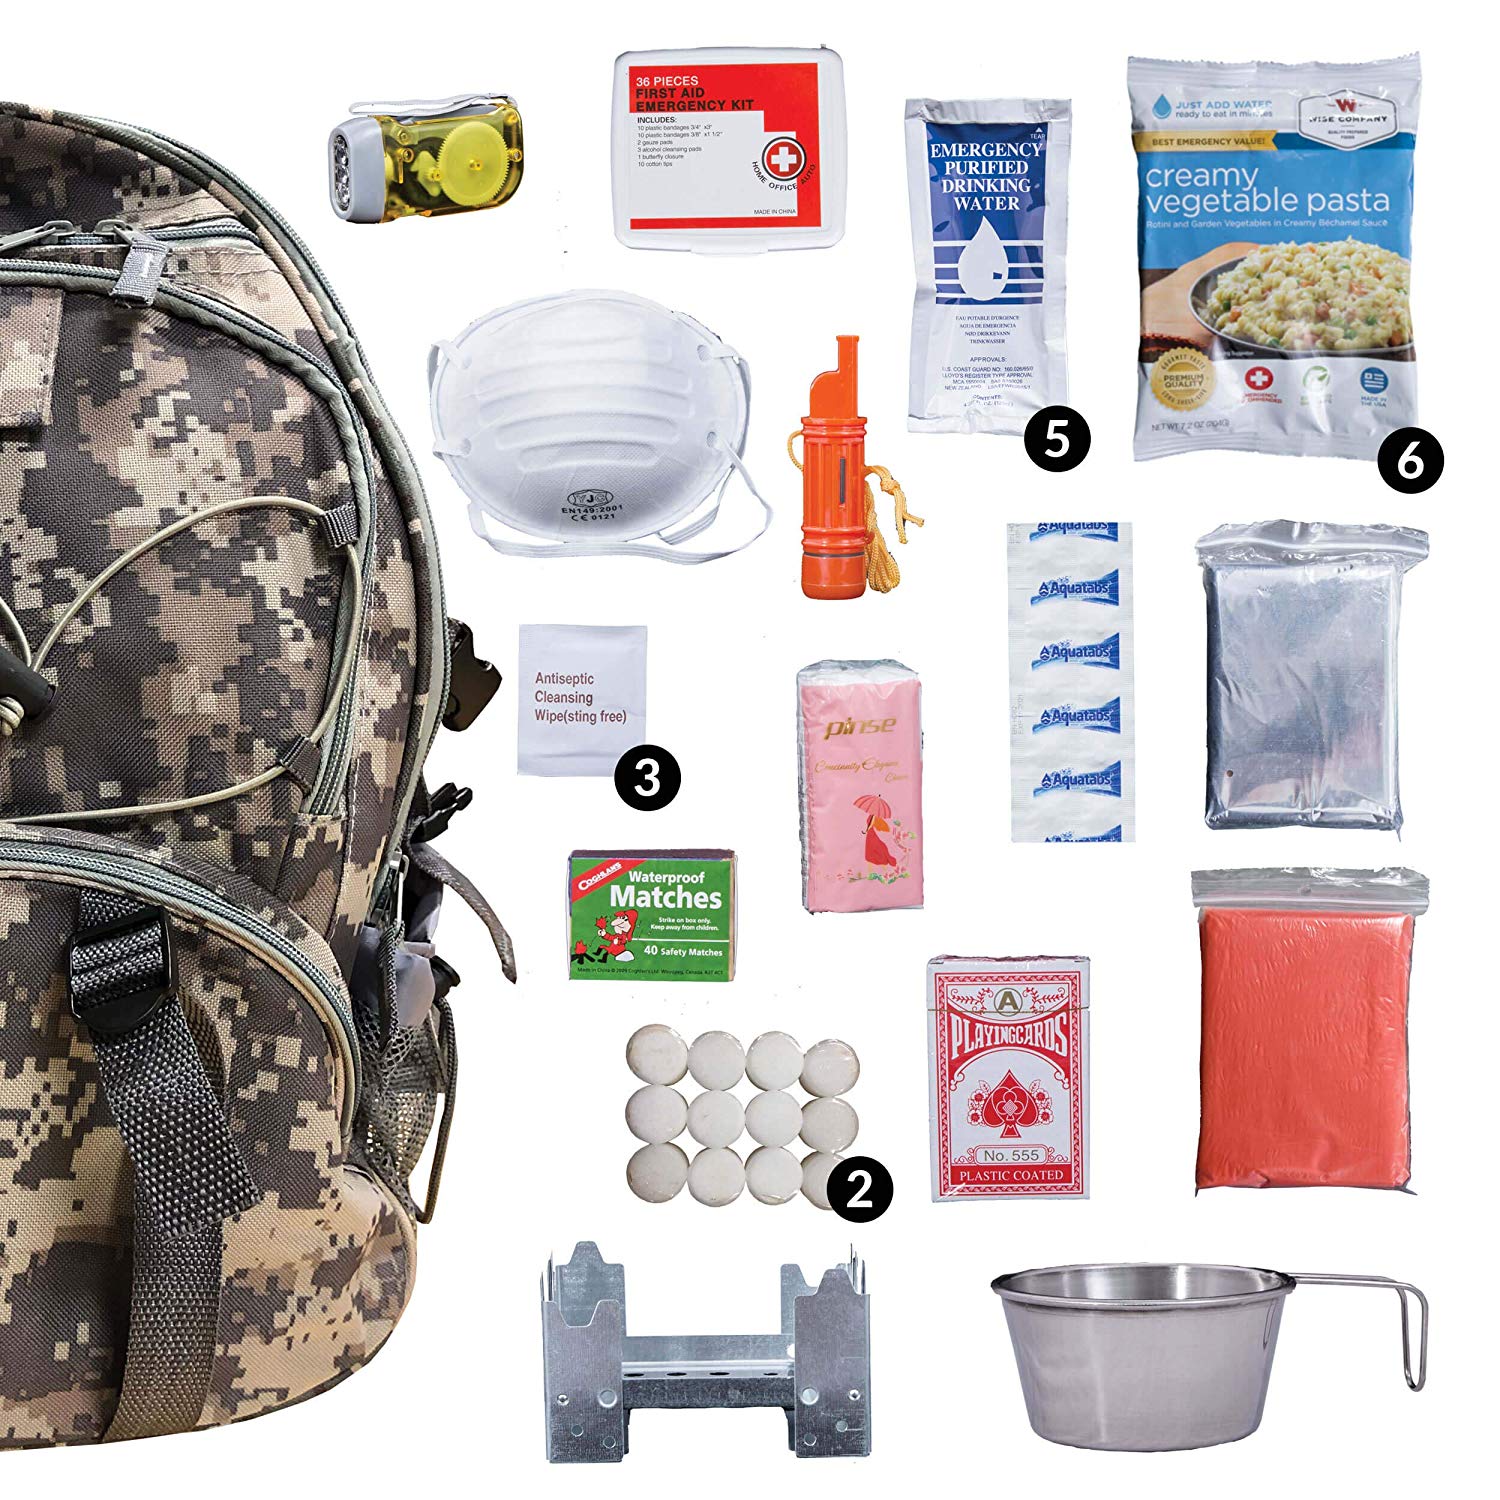 Review of Wise Food Emergency Survival Backpack Kit, Great Go Bag for Hurricanes, Fires, Earthquakes